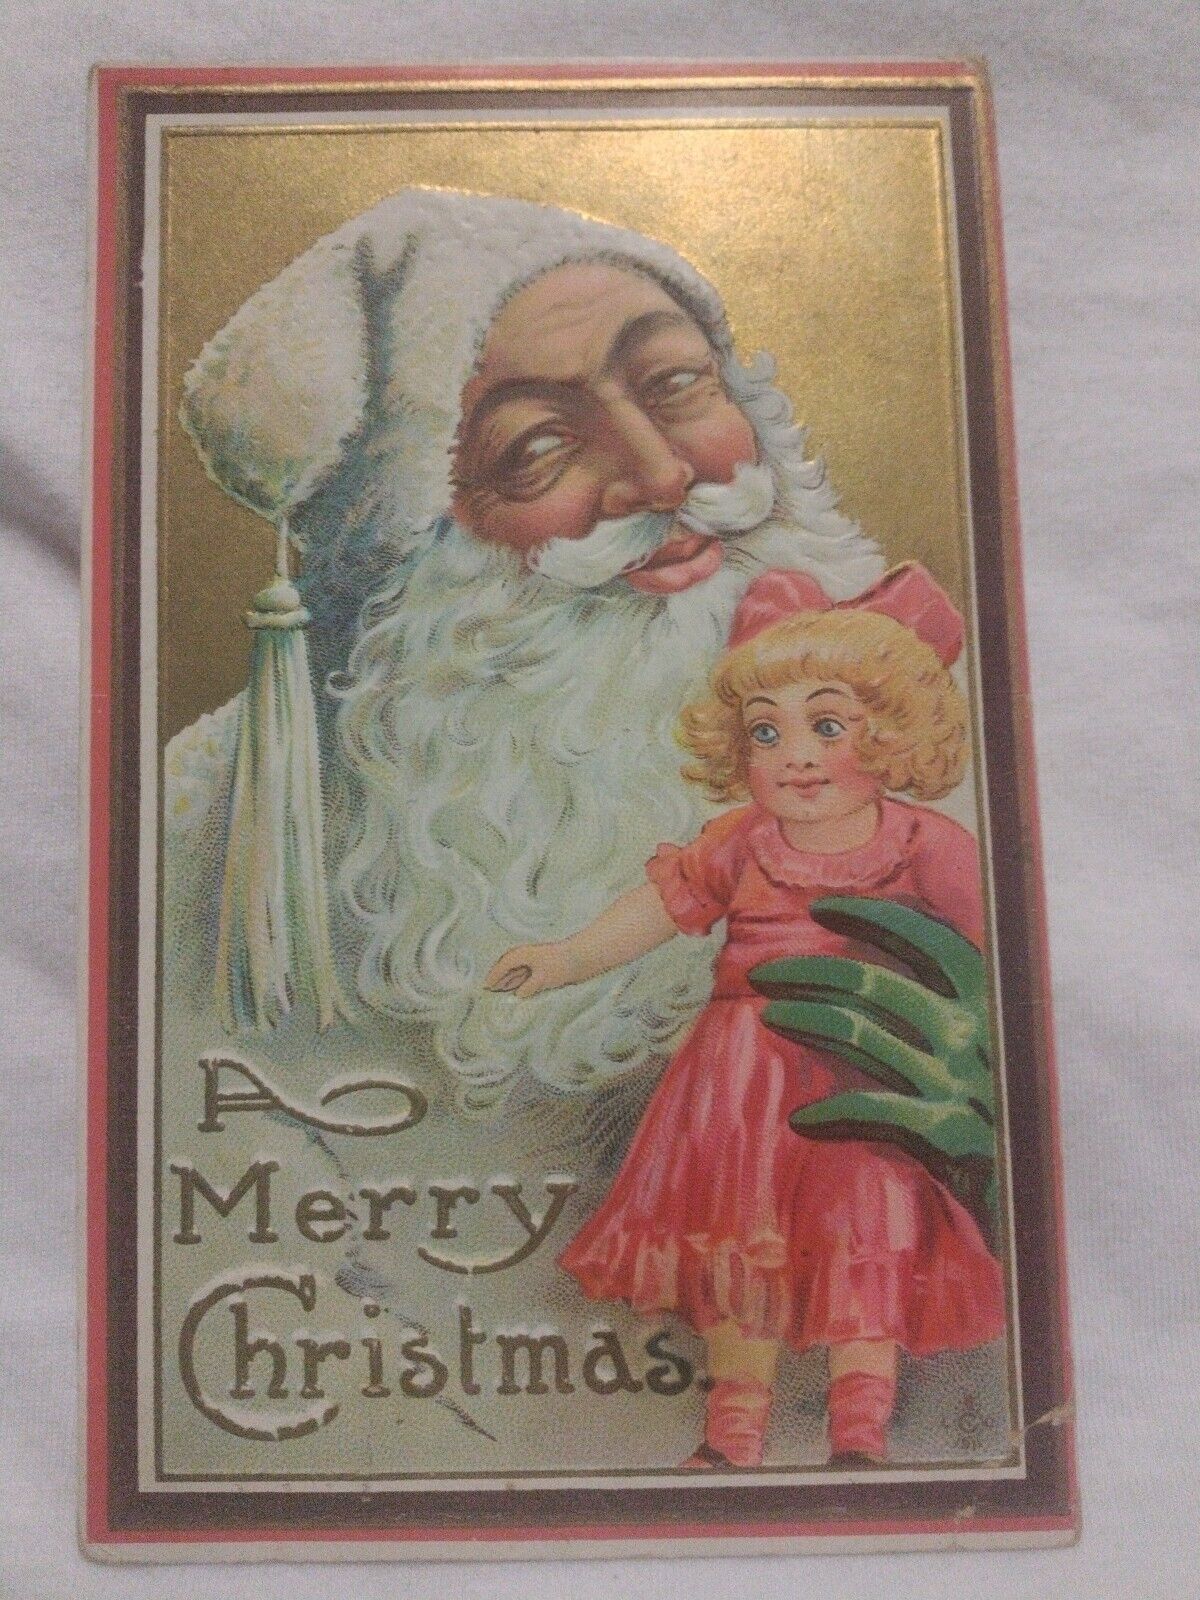 Christmas Postcard White Suited Santa Claus with Green Glove Holding Pink Doll